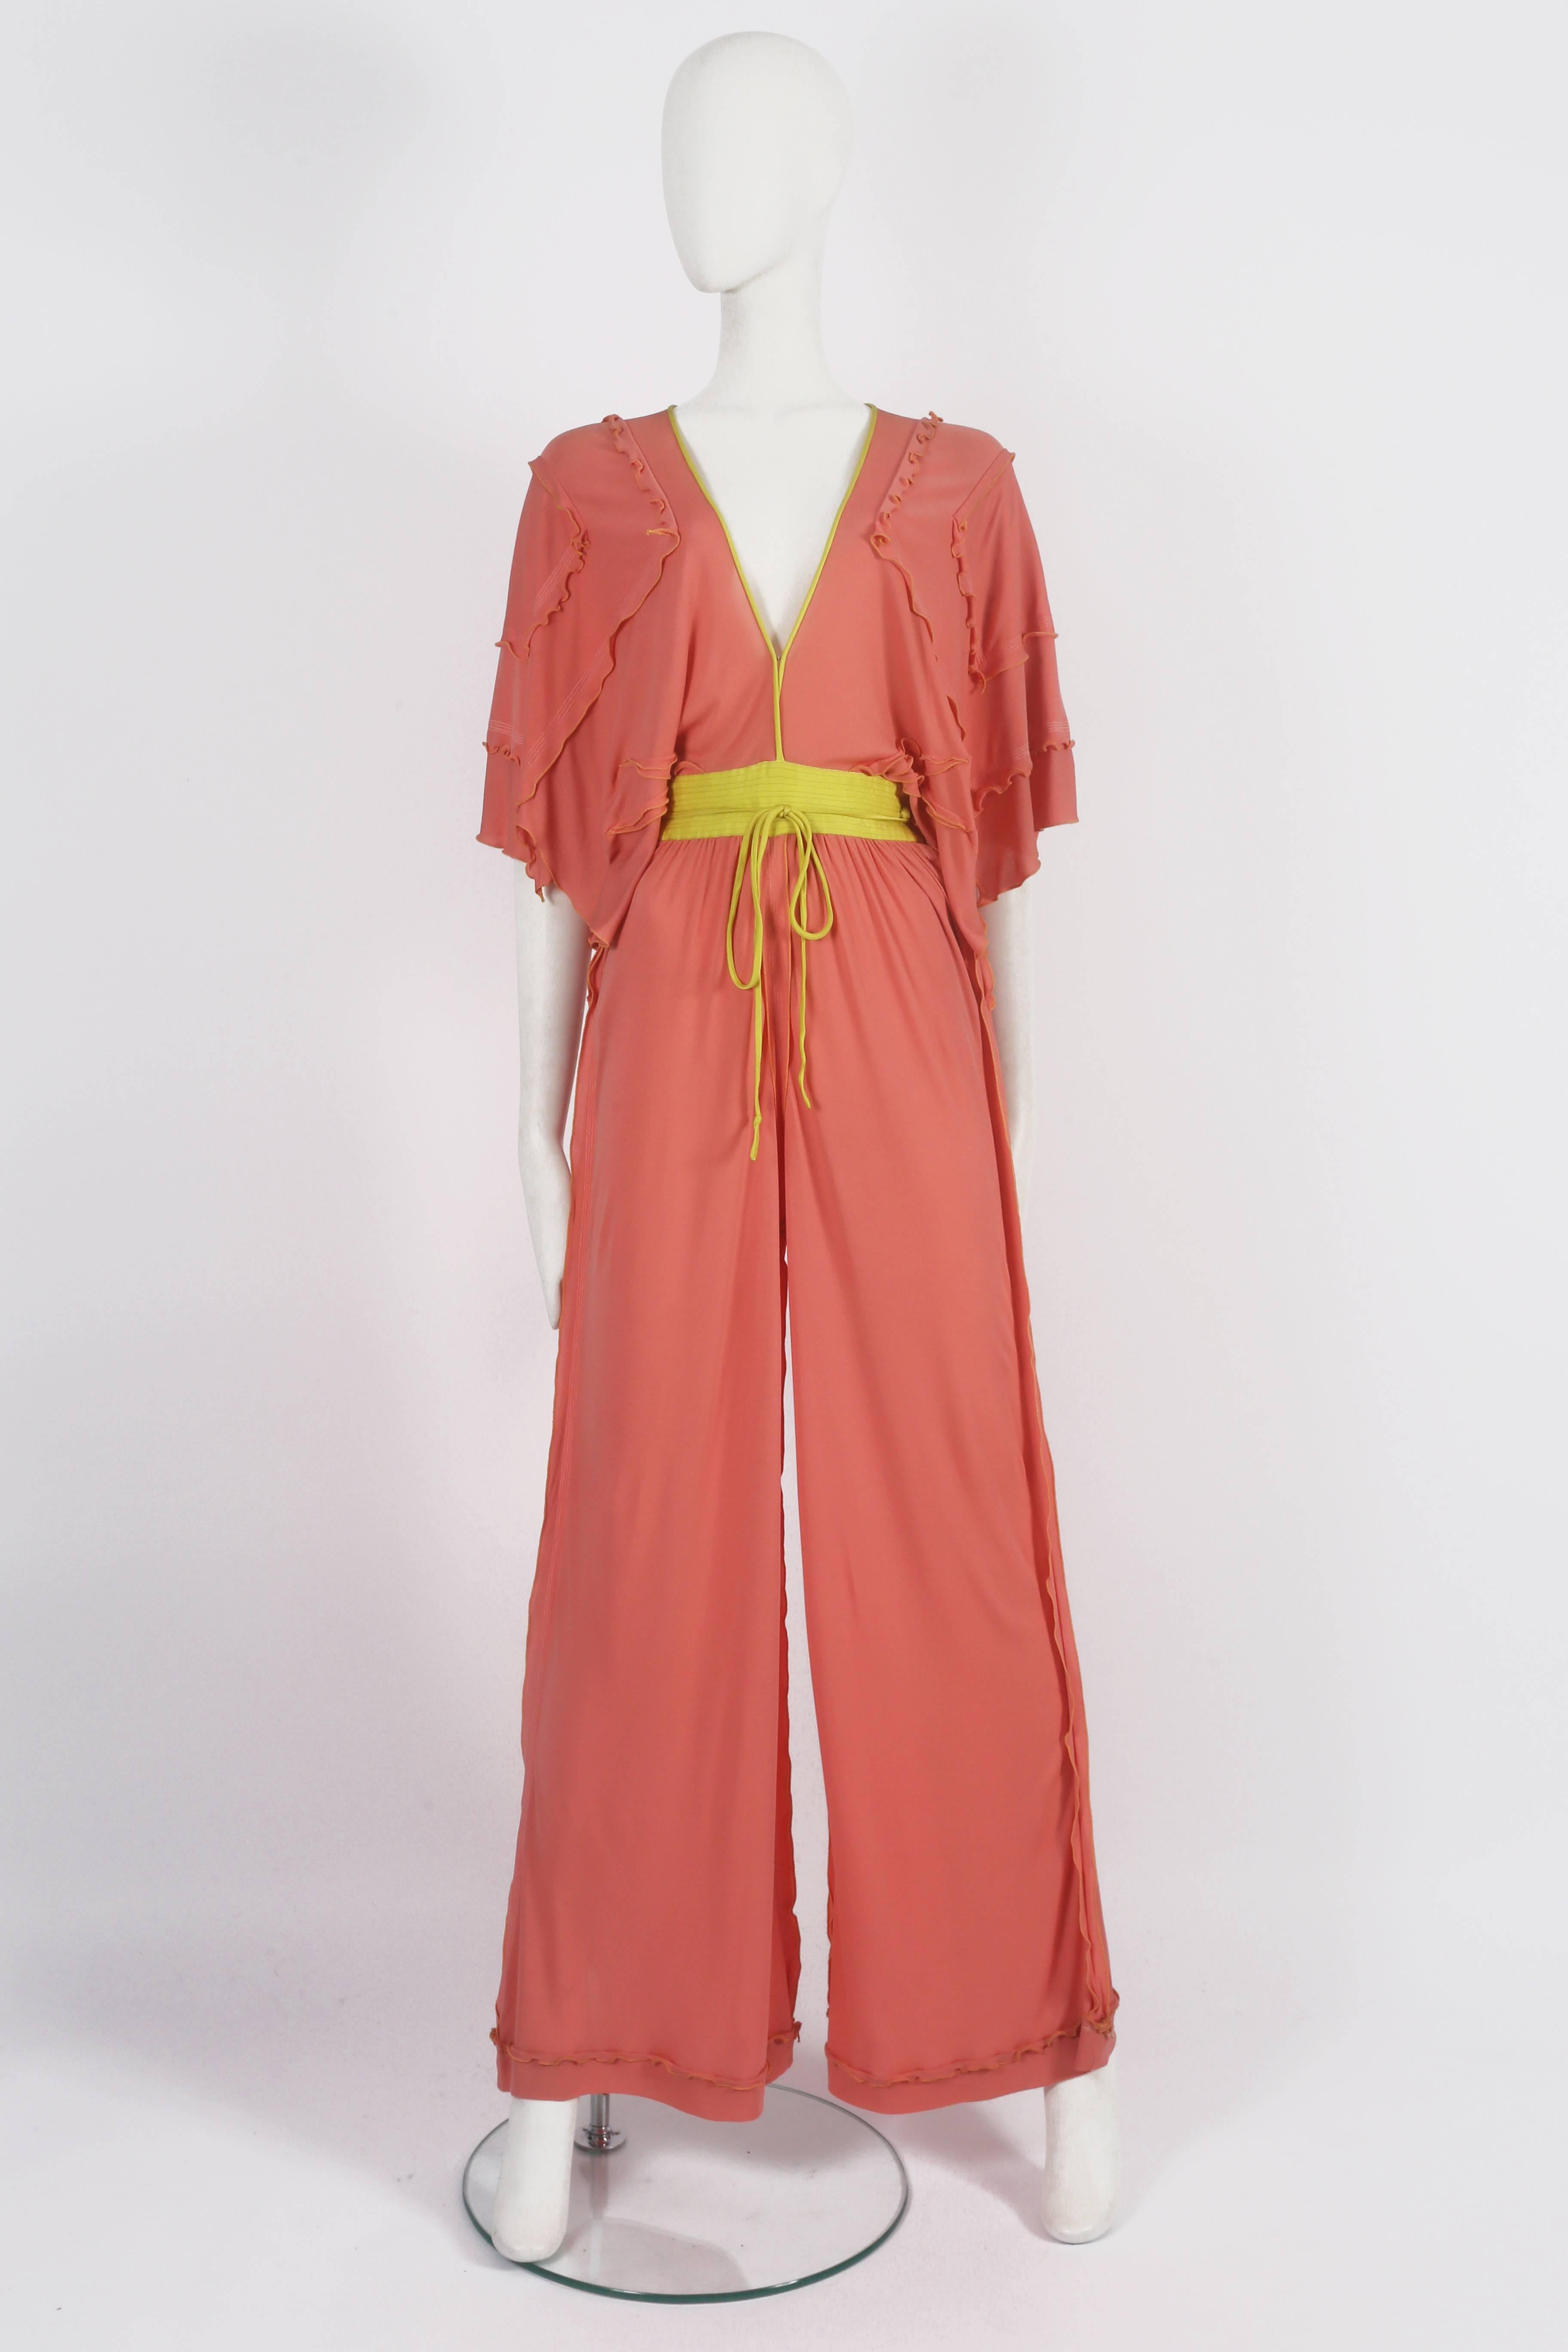 A rare evening jumpsuit by Zandra Rhodes in a salmon pink fine jersey with yellow satin belt and waist ties. 